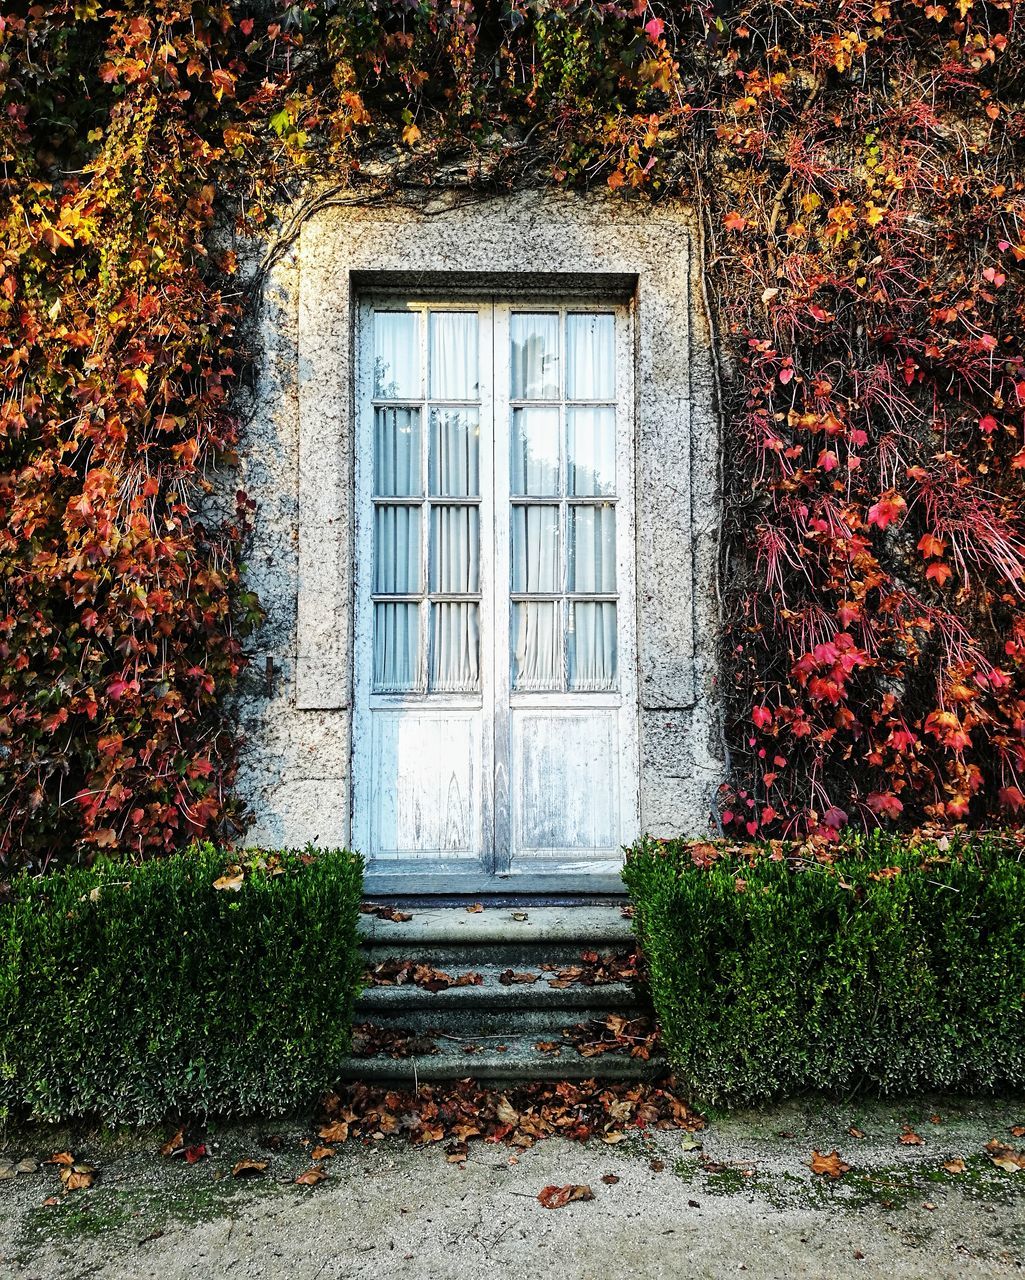 architecture, built structure, building exterior, building, window, plant, entrance, door, autumn, plant part, no people, leaf, day, house, closed, nature, ivy, wall, residential district, outdoors, growth, home, red, wall - building feature, urban area, creeper plant, old, facade